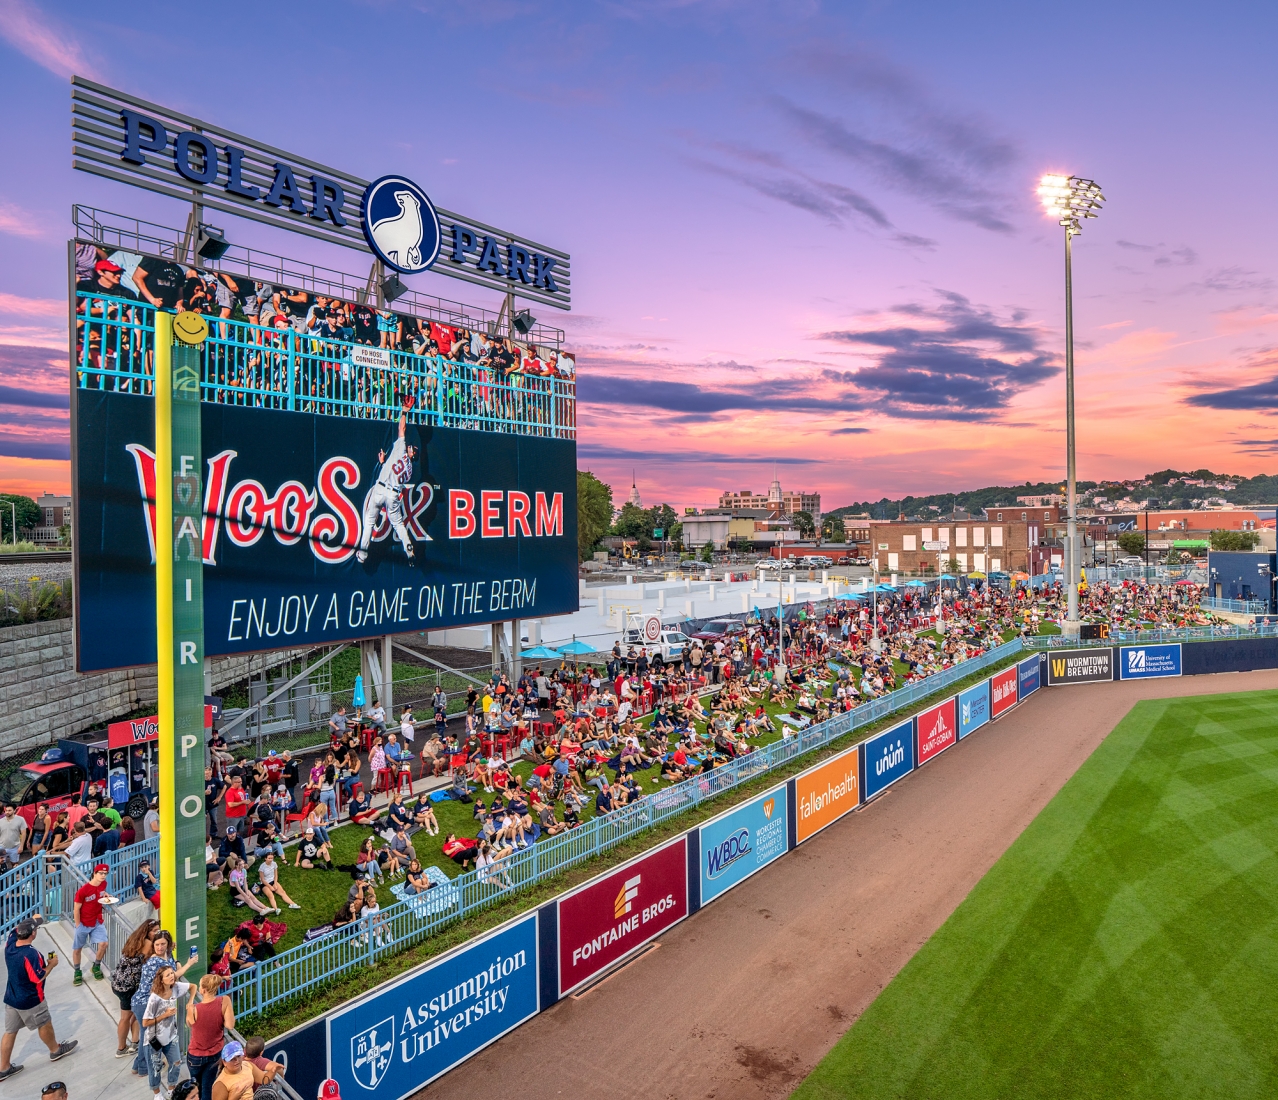 Polar Park comes 'to life': Worcester ballpark praised as Red Sox